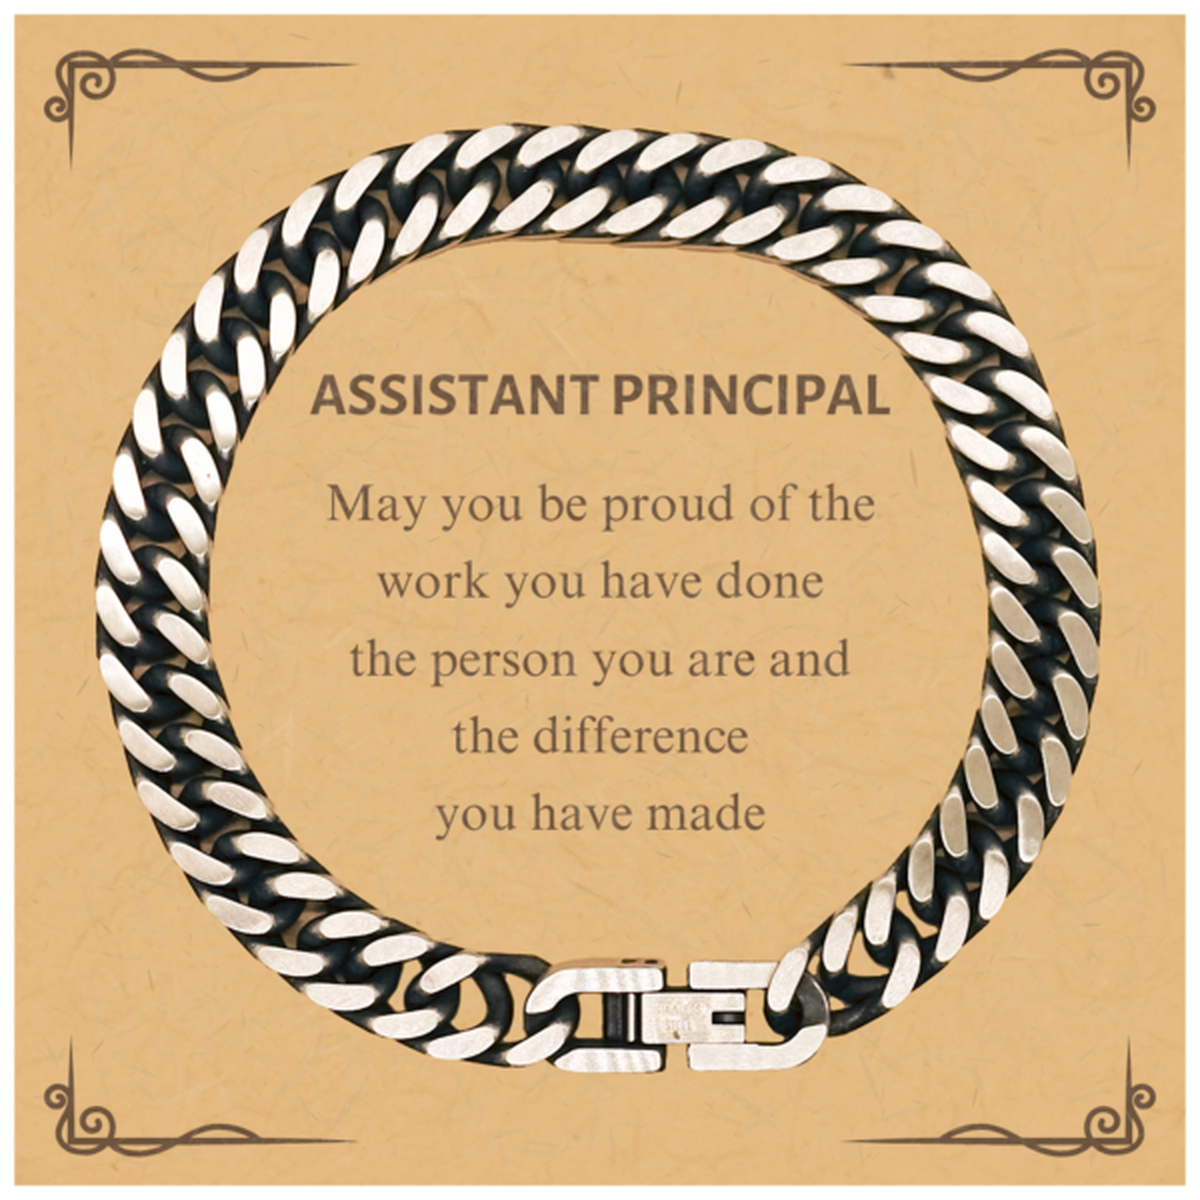 Assistant Principal May you be proud of the work you have done, Retirement Assistant Principal Cuban Link Chain Bracelet for Colleague Appreciation Gifts Amazing for Assistant Principal